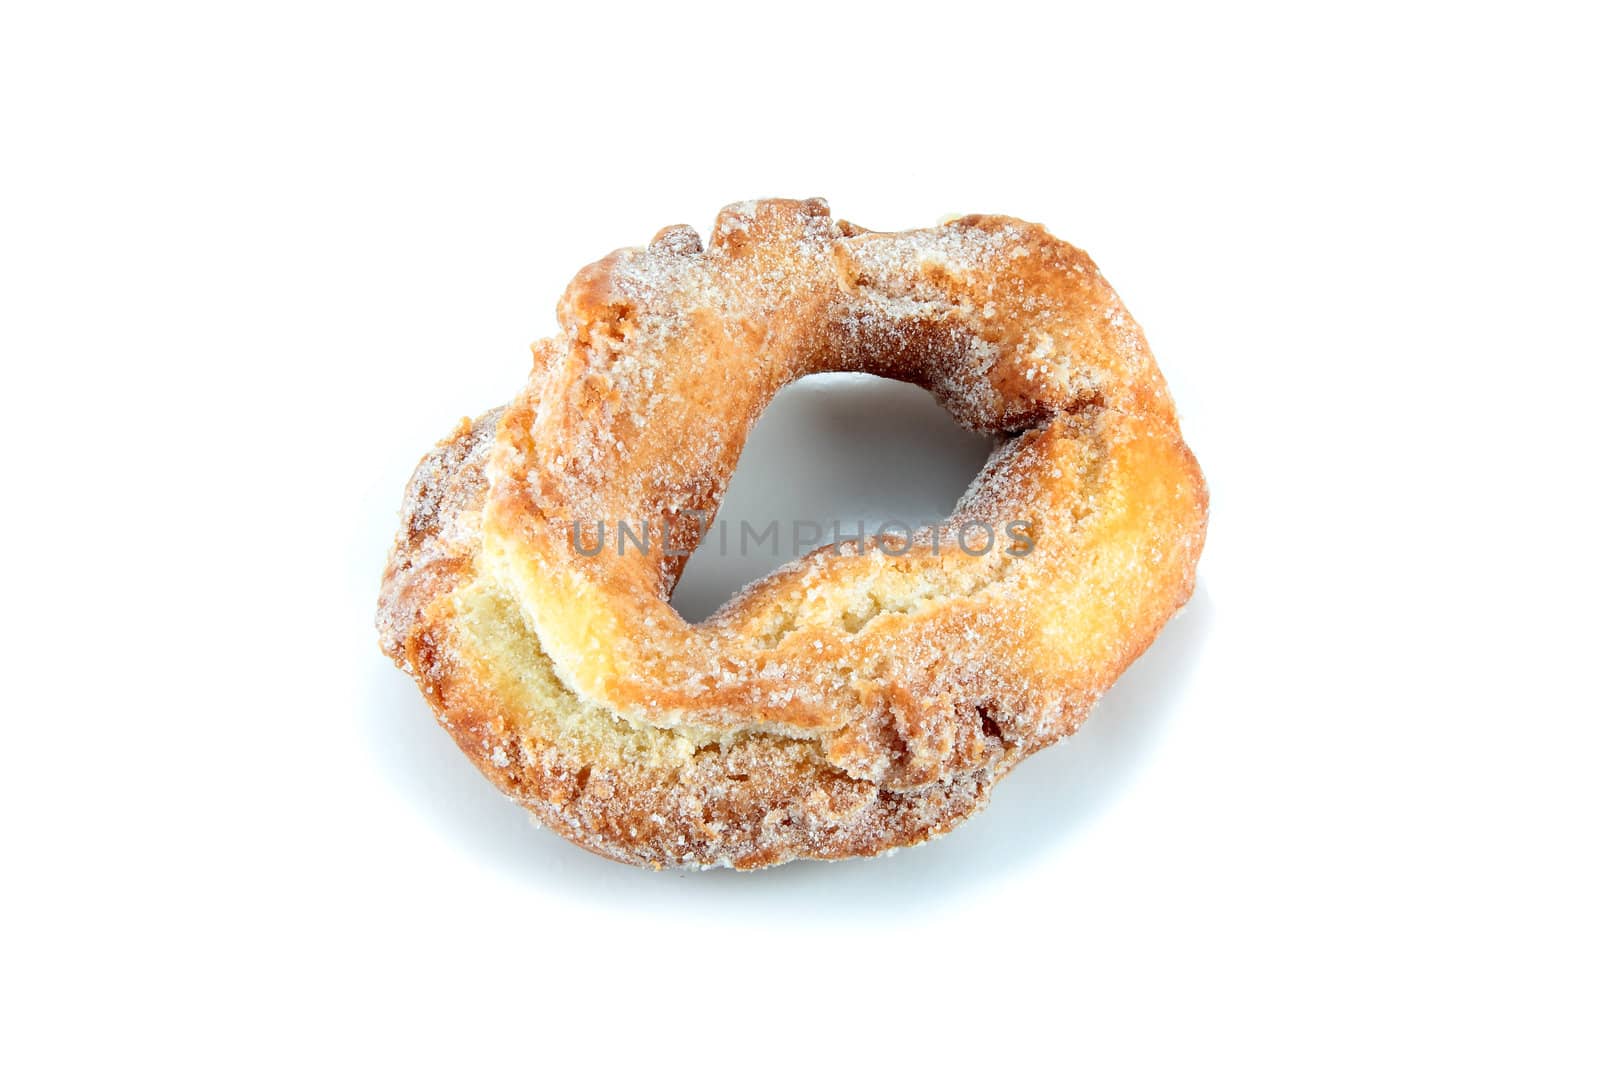 traditional homemade donuts with natural ingredients on white background